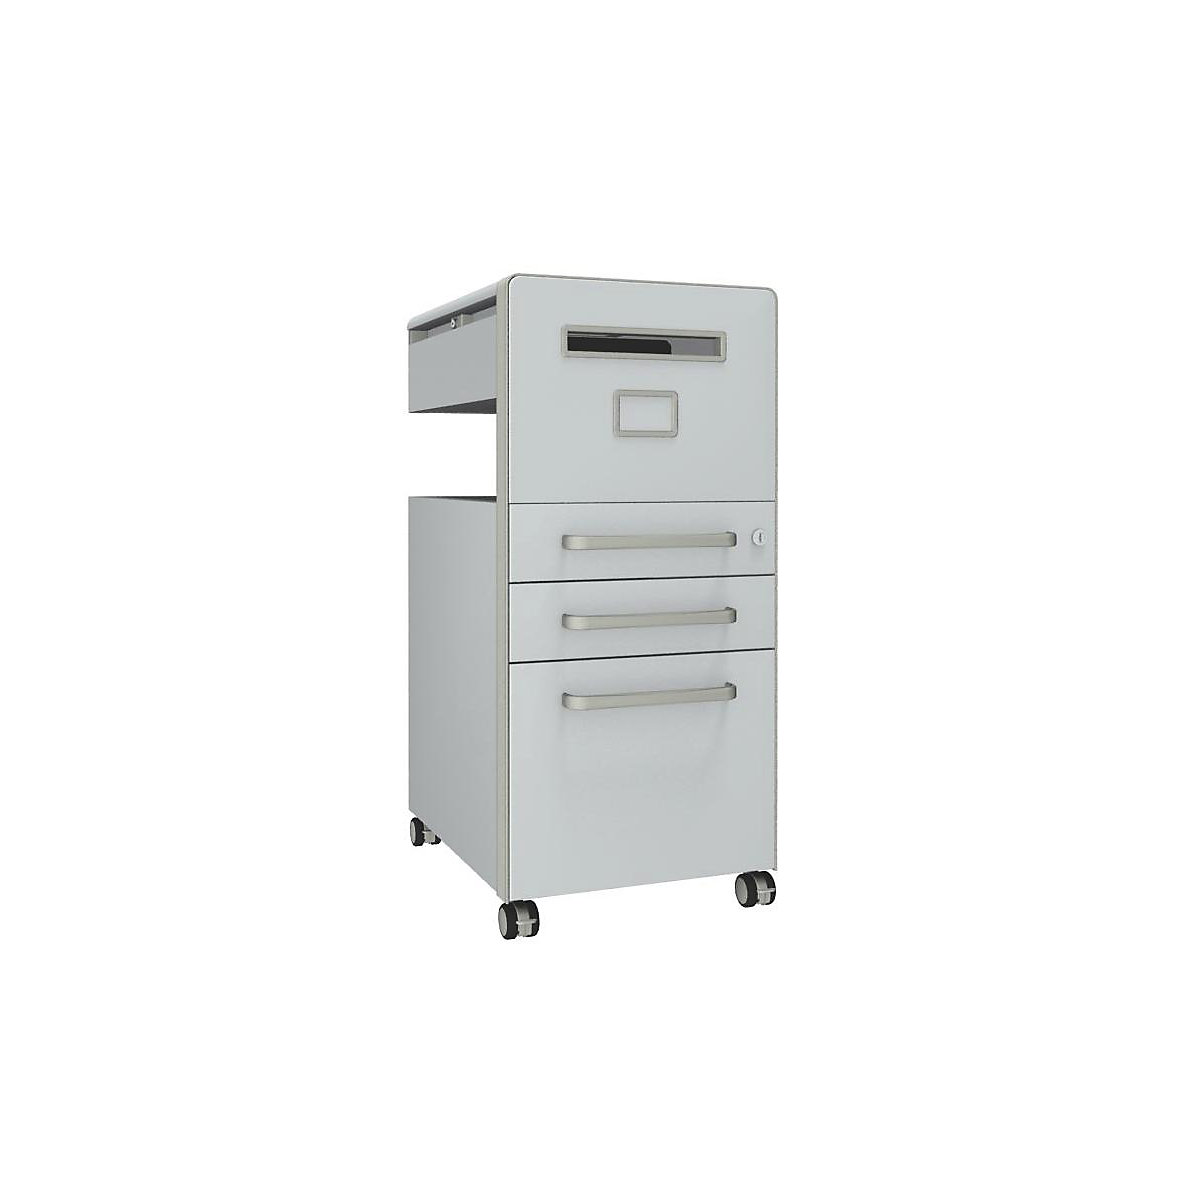 Bite™ pedestal furniture, with 1 whiteboard, opens on the right side – BISLEY, with 2 universal drawers, 1 suspension file drawer, traffic white-16